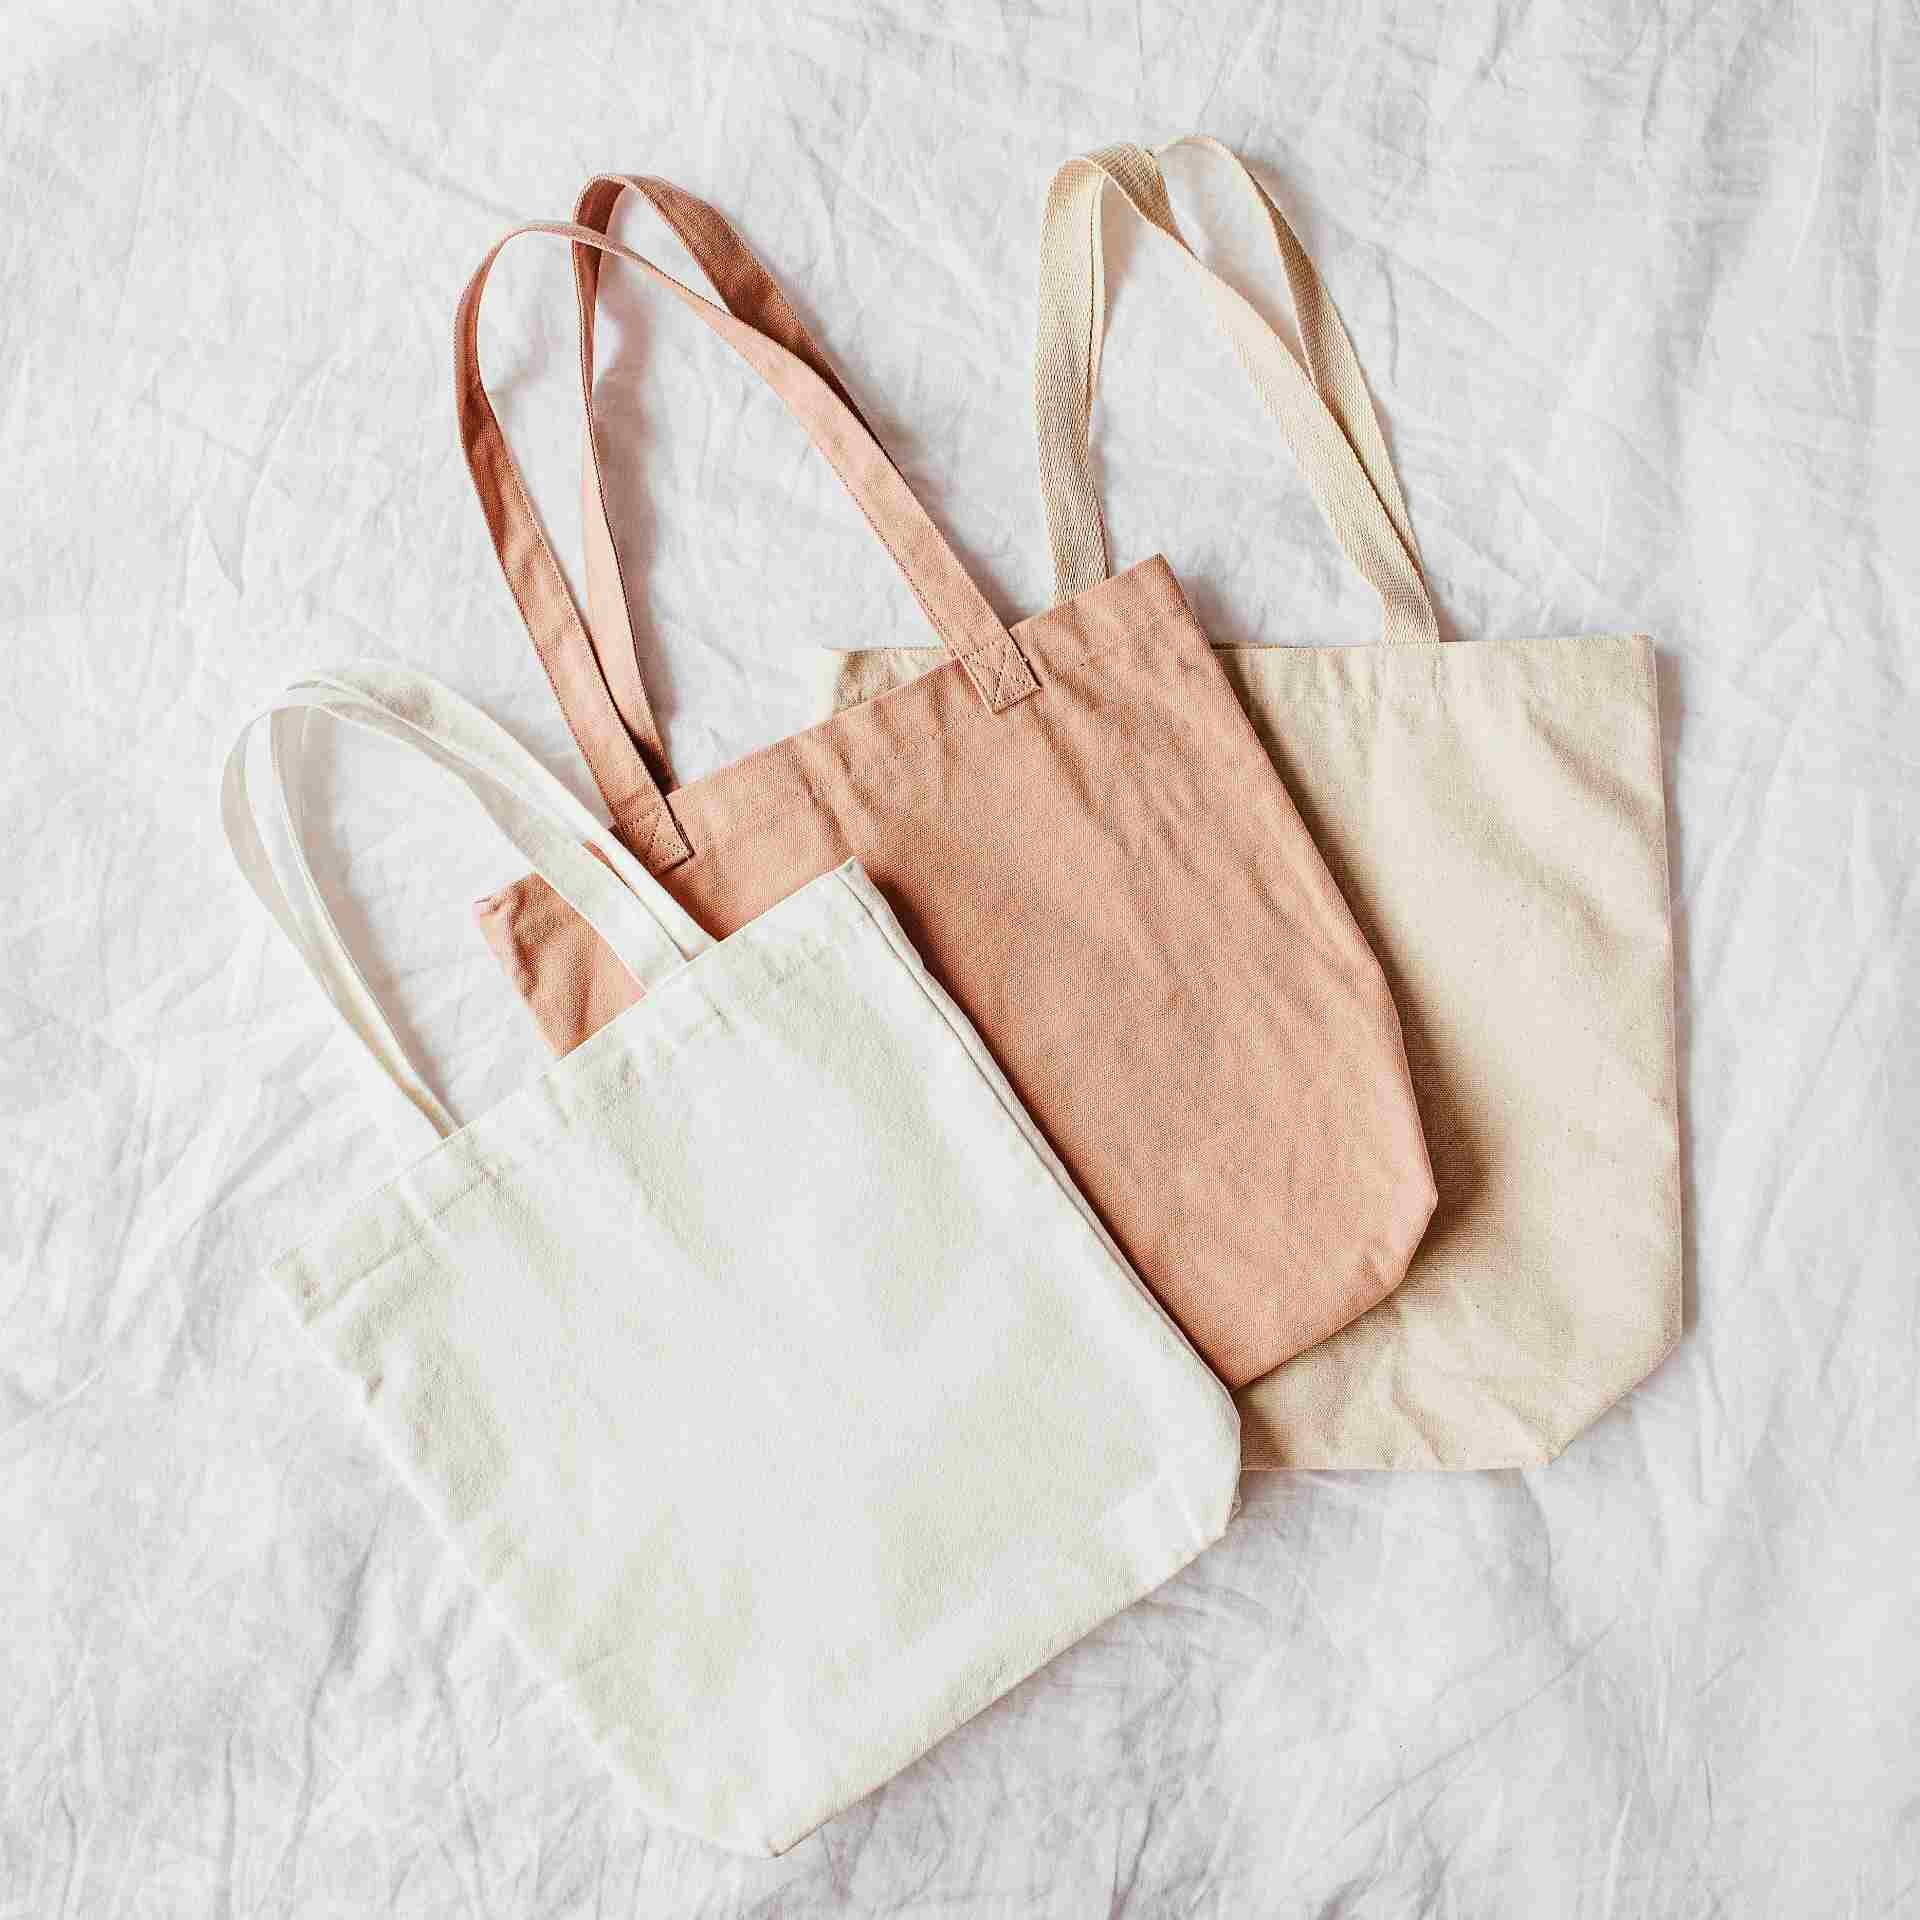 white_pink_and_nude_totebags.jpg